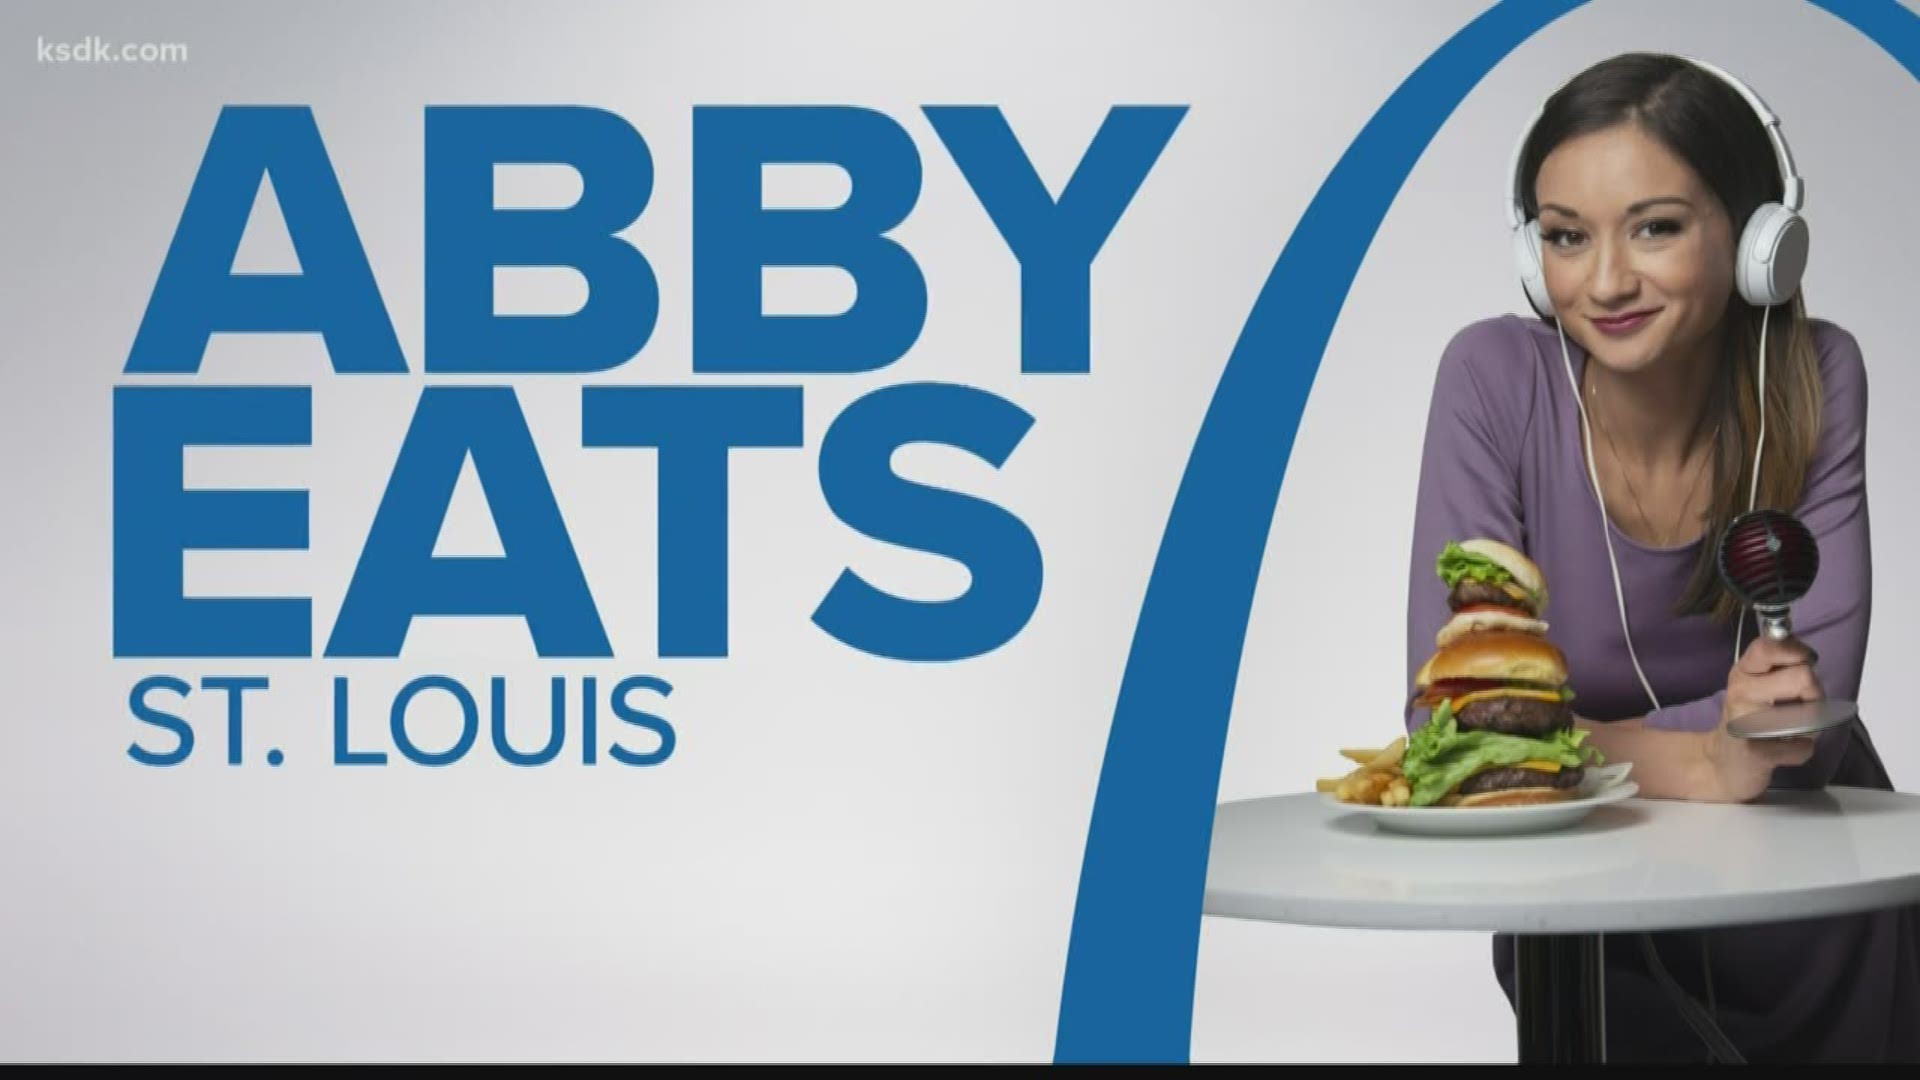 Abby Eats St. Louis: Abby dishes on Filipino food